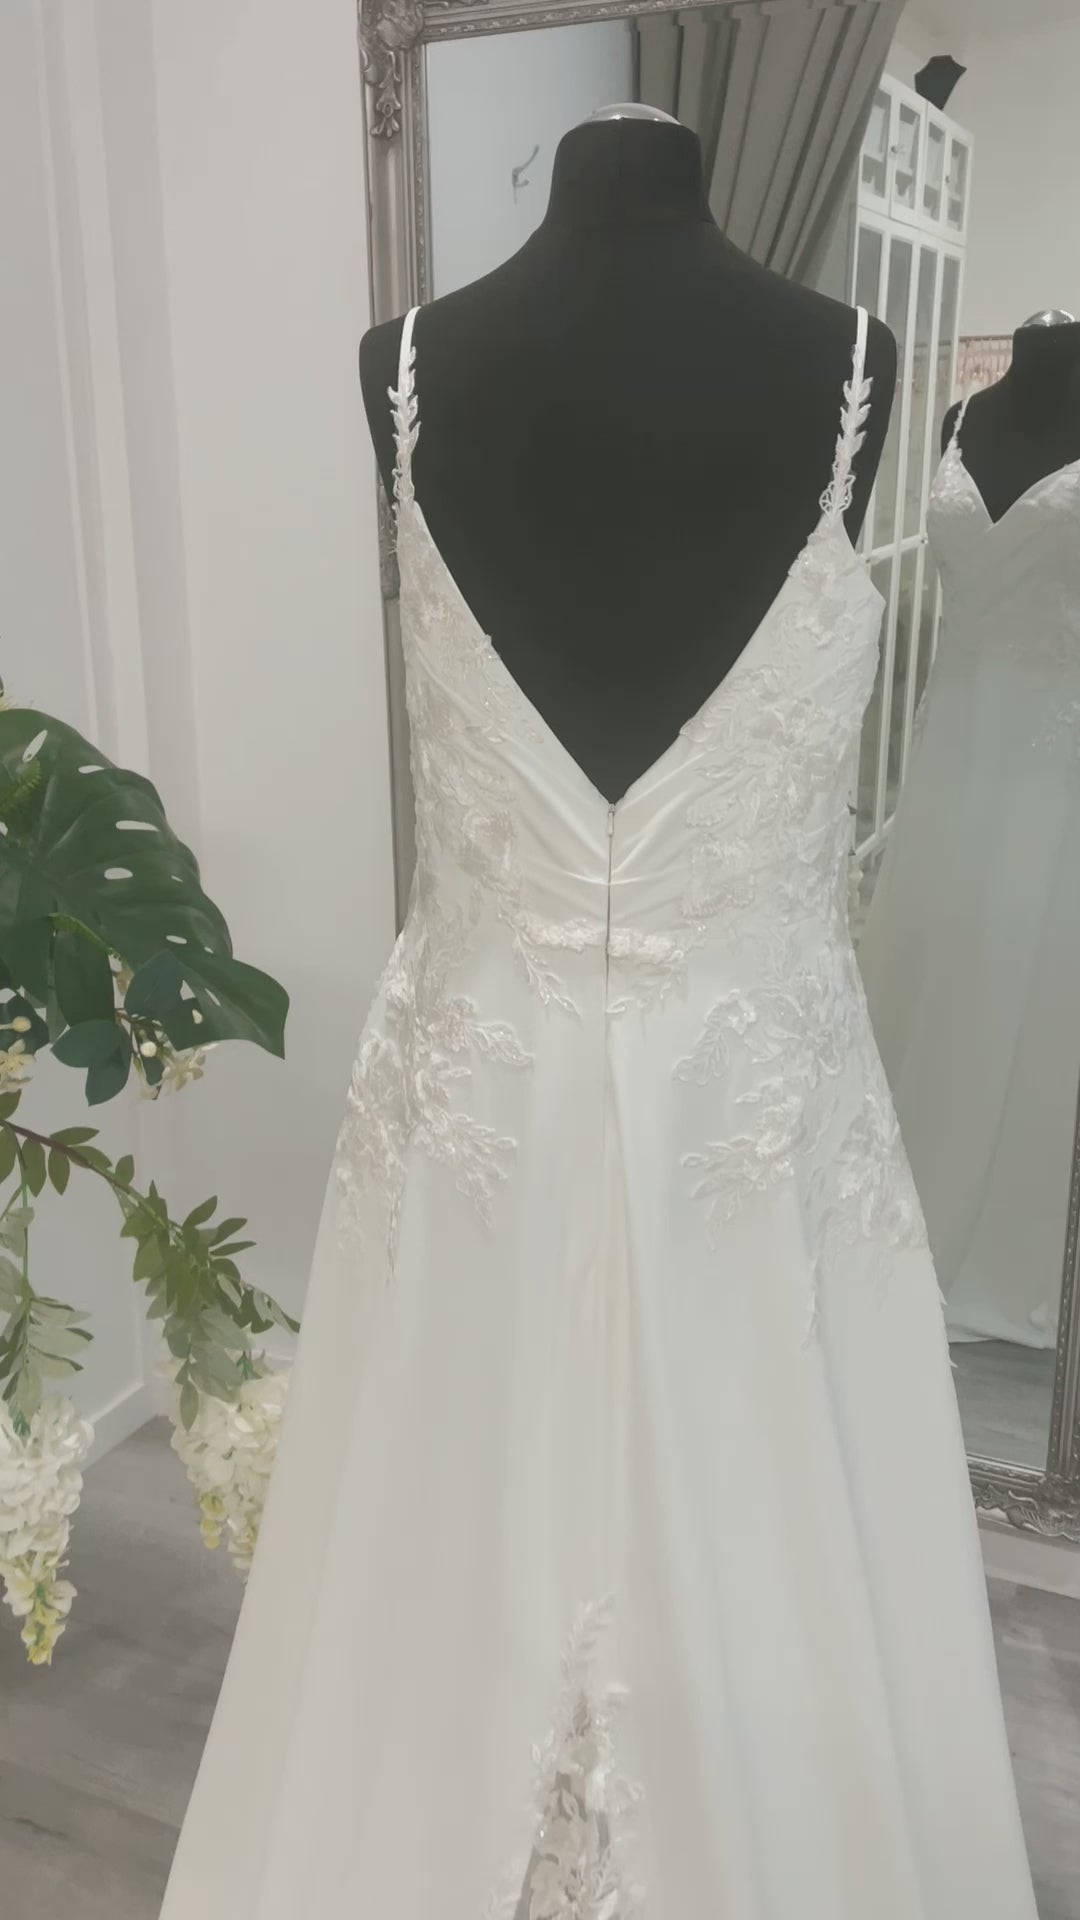 Harlow Wedding Dress with lace detailing and V-neckline on display at Divine Bridal salon.